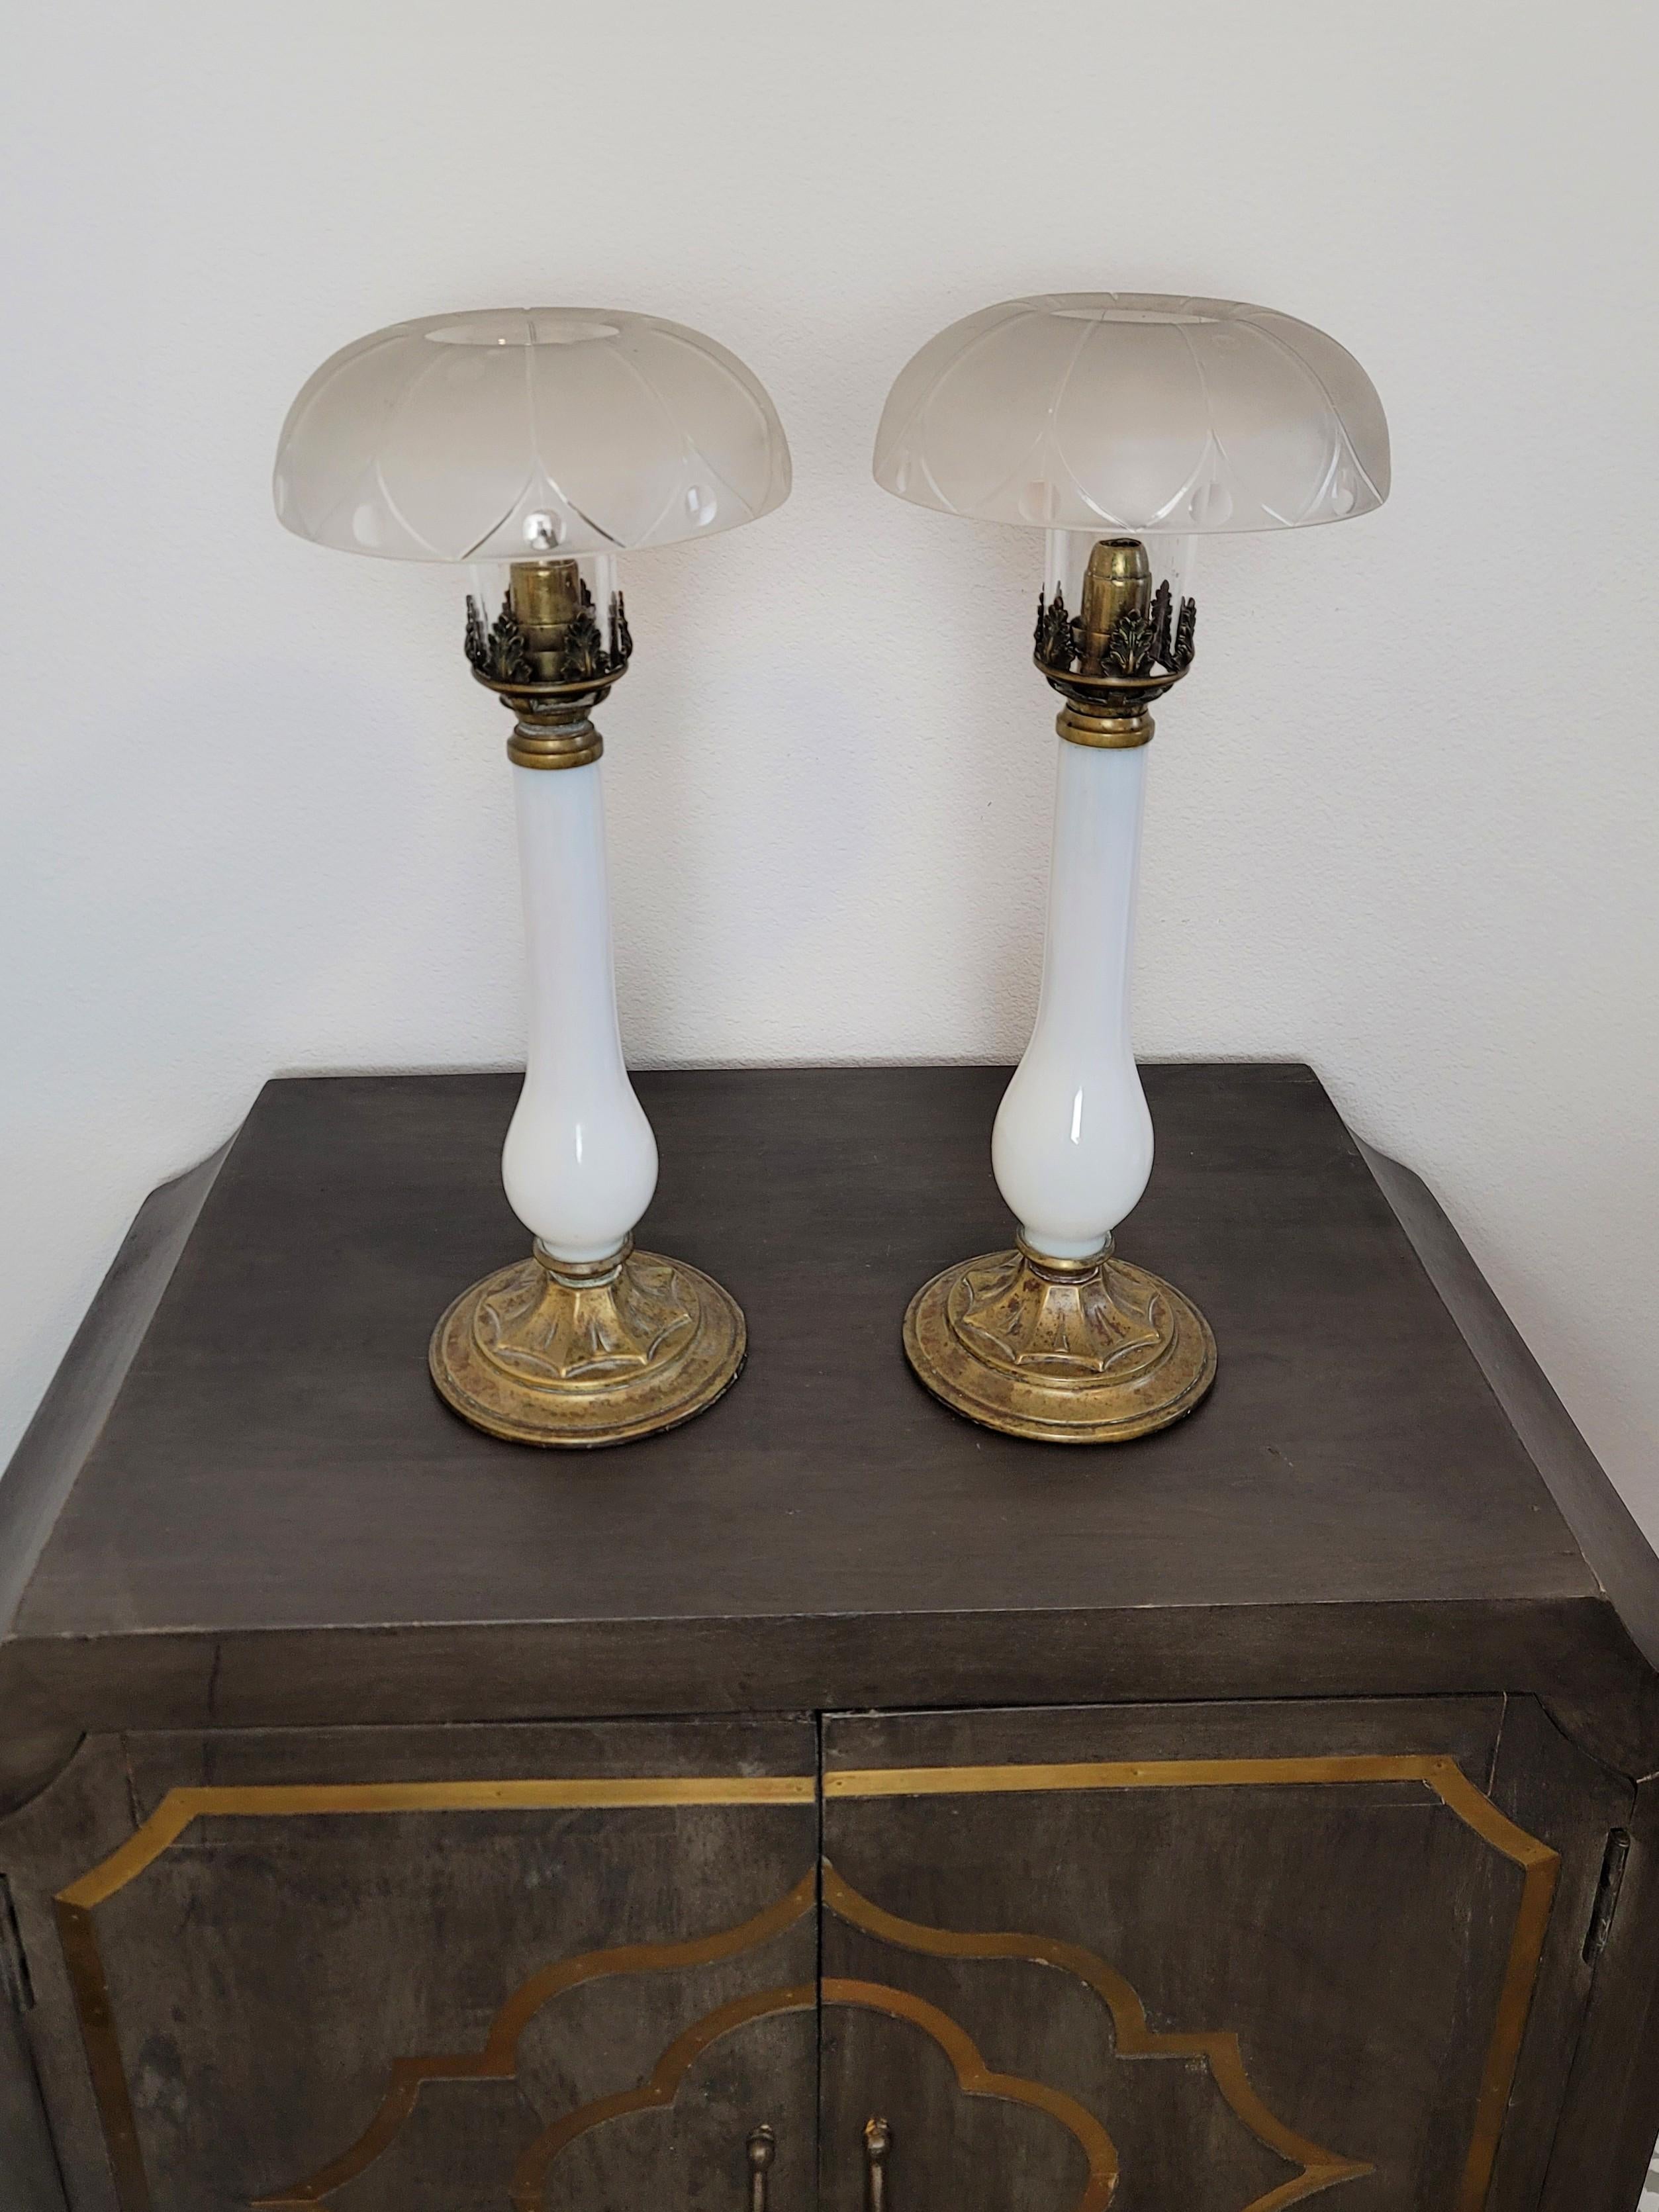 Scarce French Empire Period Opaline Glass Brass Candlestick Table Lamp Pair In Good Condition For Sale In Forney, TX